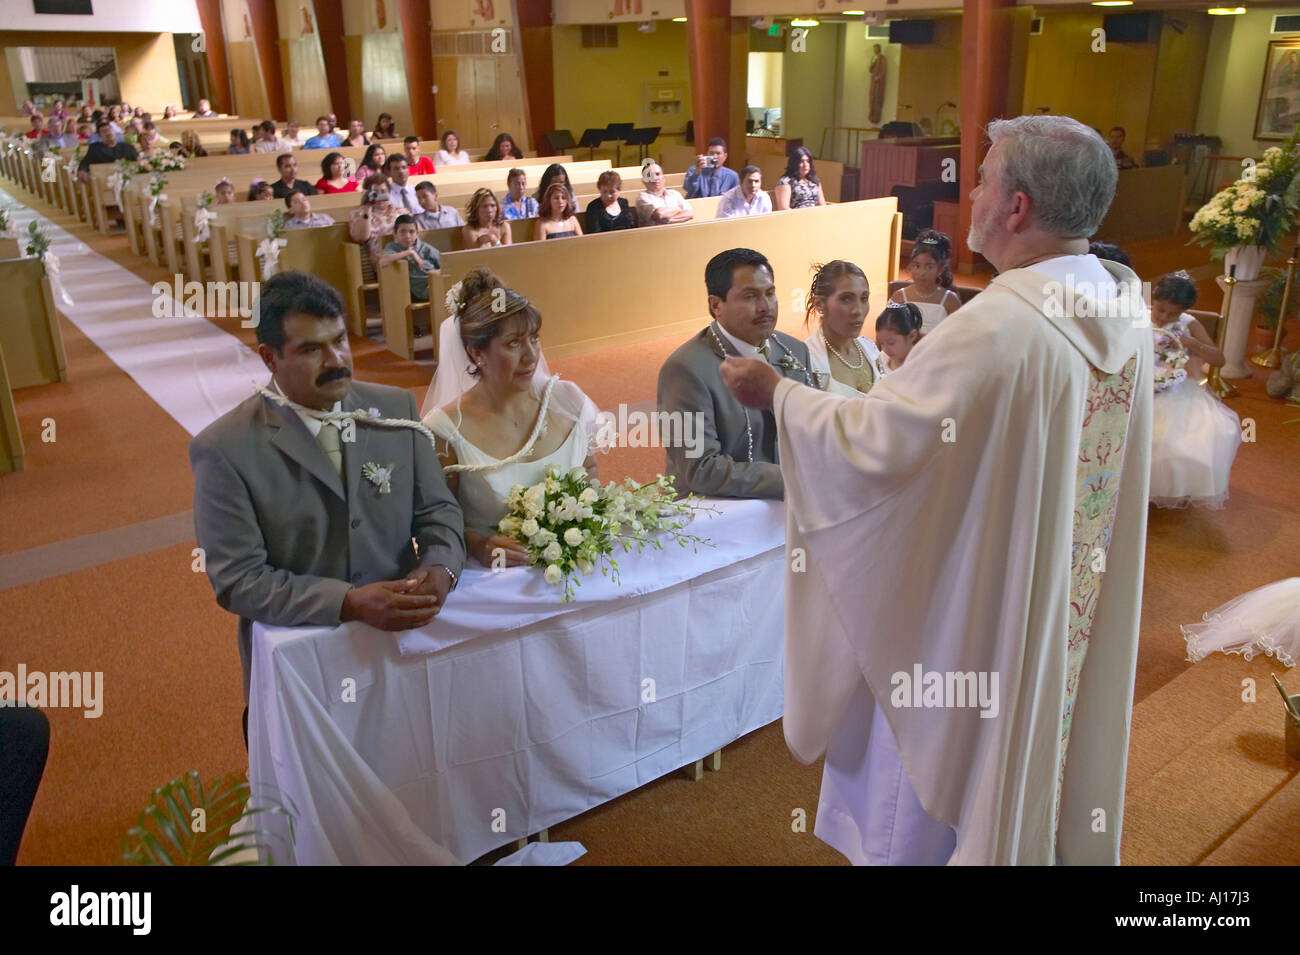 Catholic Priest Administers Wedding Vows To Two Latino American